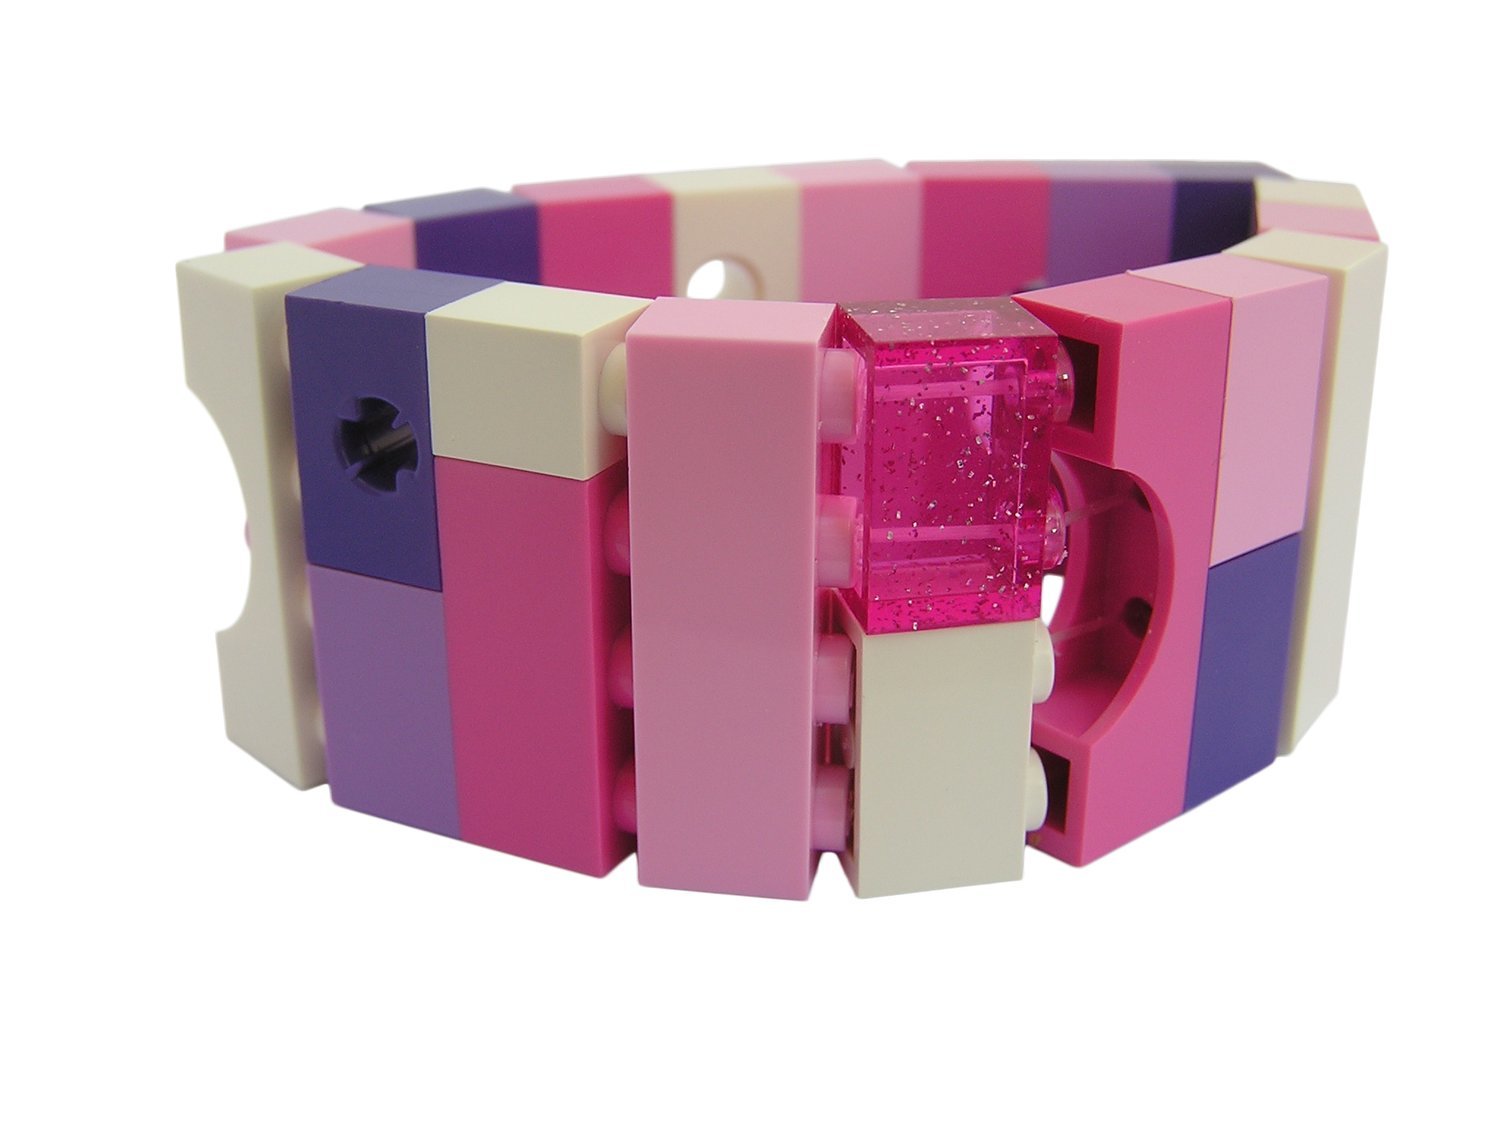 Collectible bracelet Model 20 - made from LEGO® bricks on stretchy cords - KAWAII PINK & PURPLE